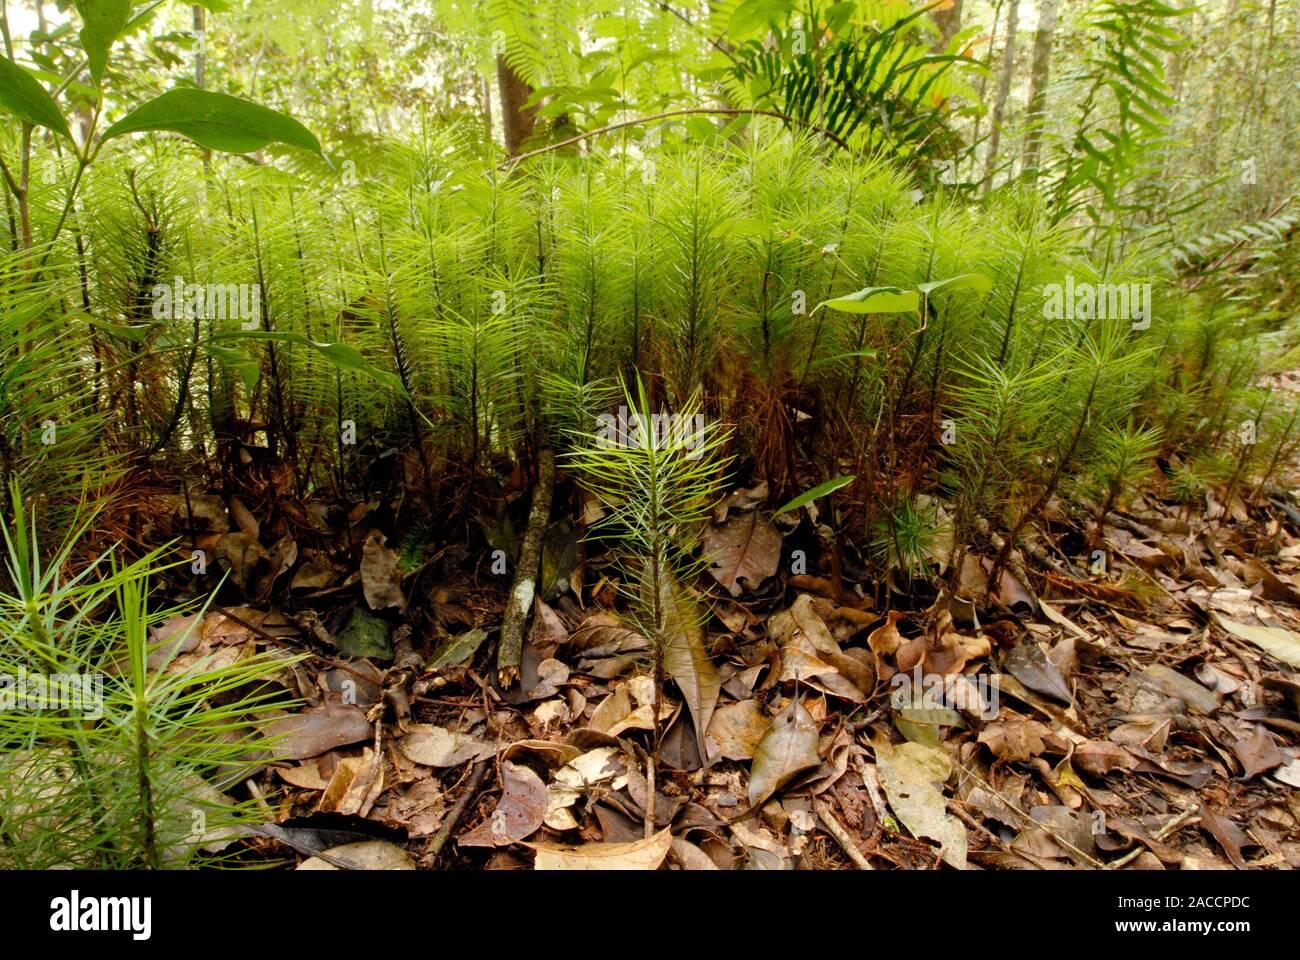 dawsonia-longifolia-moss-in-a-tropical-forest-this-species-is-the-tallest-and-one-of-the-most-complex-mosses-photographed-on-mount-kinabalu-sabah-2ACCPDC.jpg